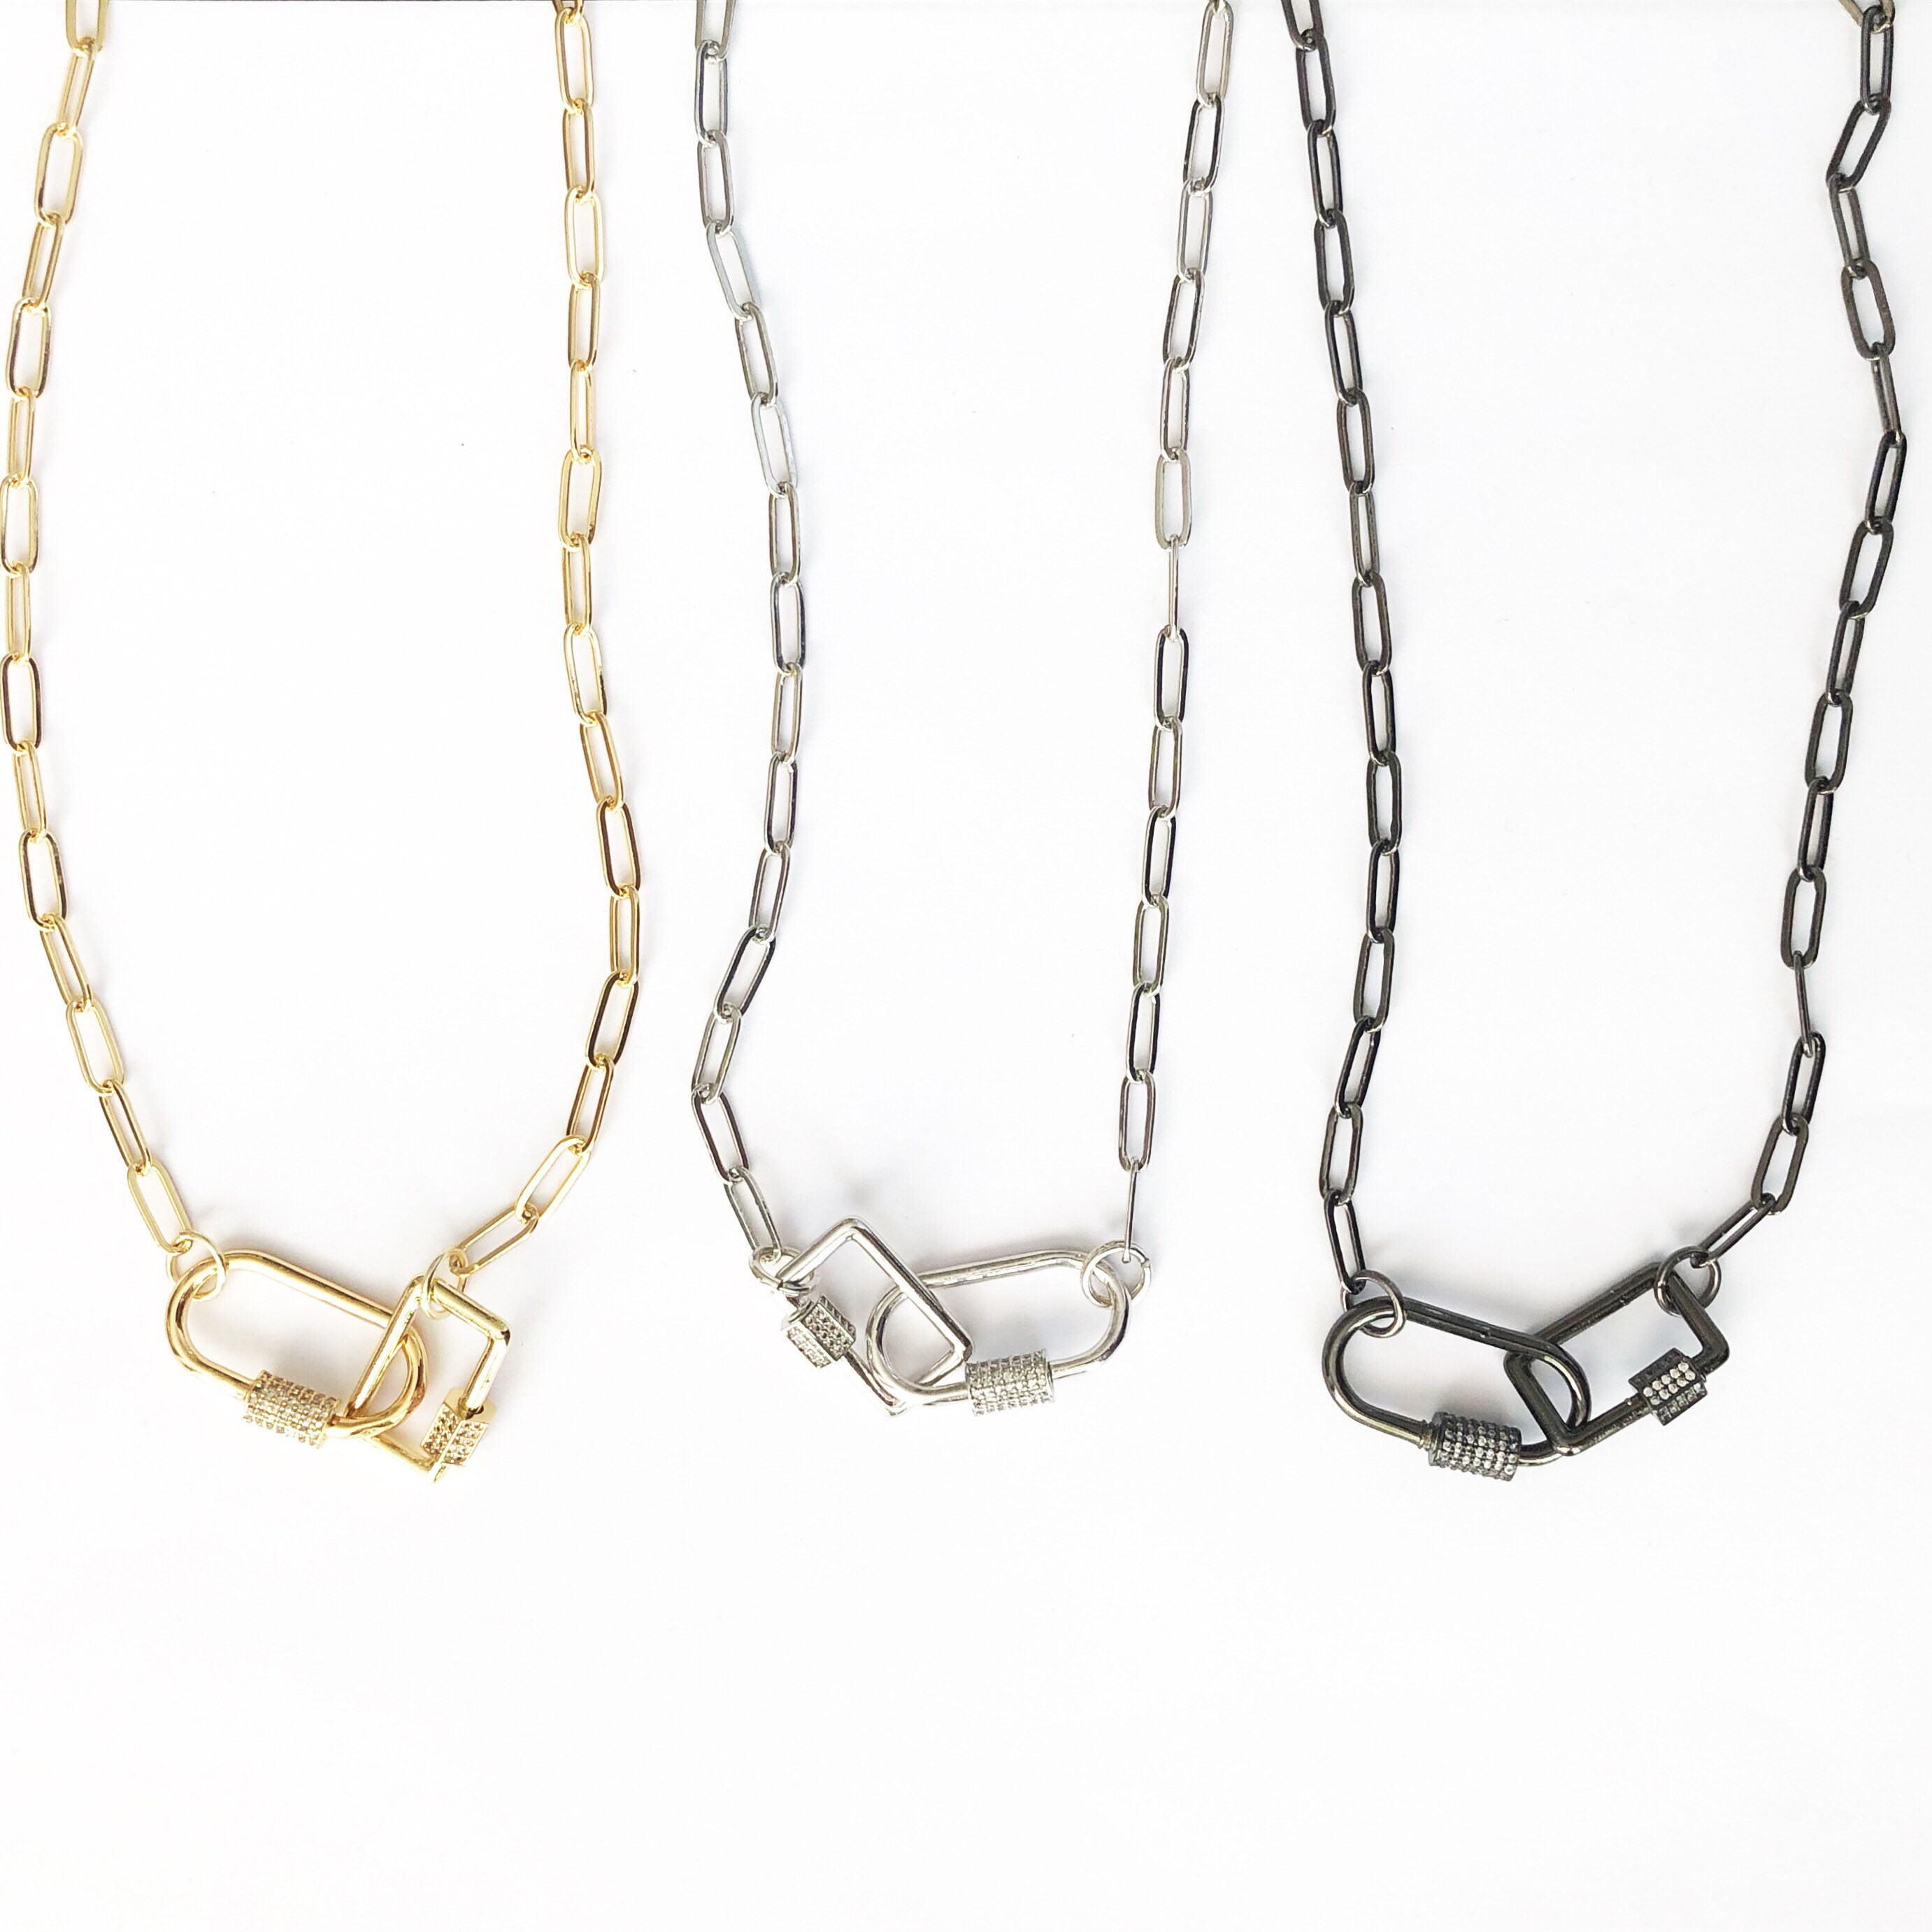 Gold Carabiner Necklace-Chunky Multilink Chain Necklace-Gold 16 / #4. Silver /Gold